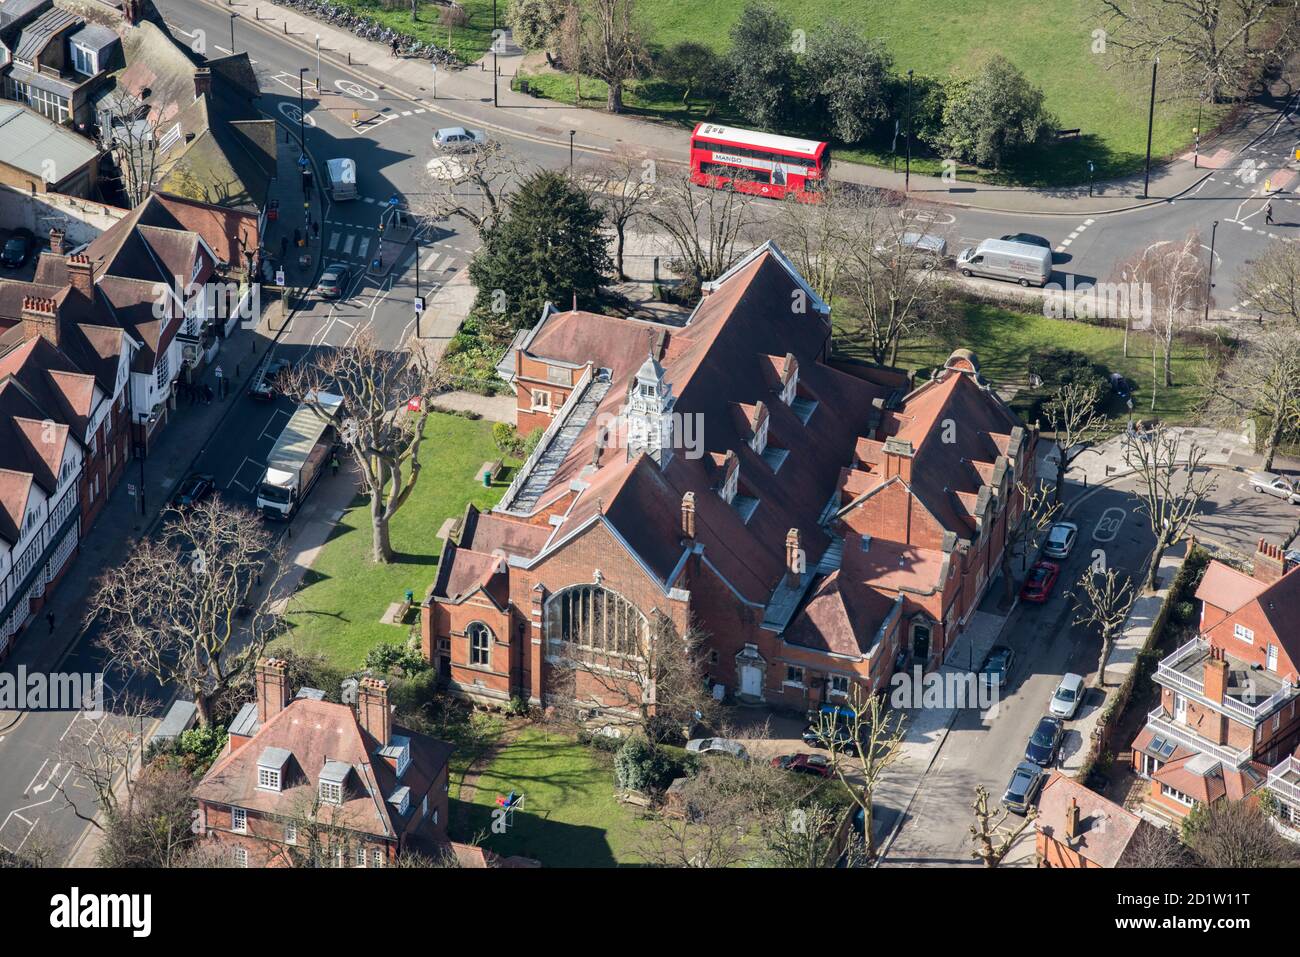 The Church of St Michael and All Angels, built as a central element in the Bedford Park Garden Suburb and designed by Richard Norman Shaw with later additions by Maurice Adams, London, 2018, UK. Aerial view. Stock Photo